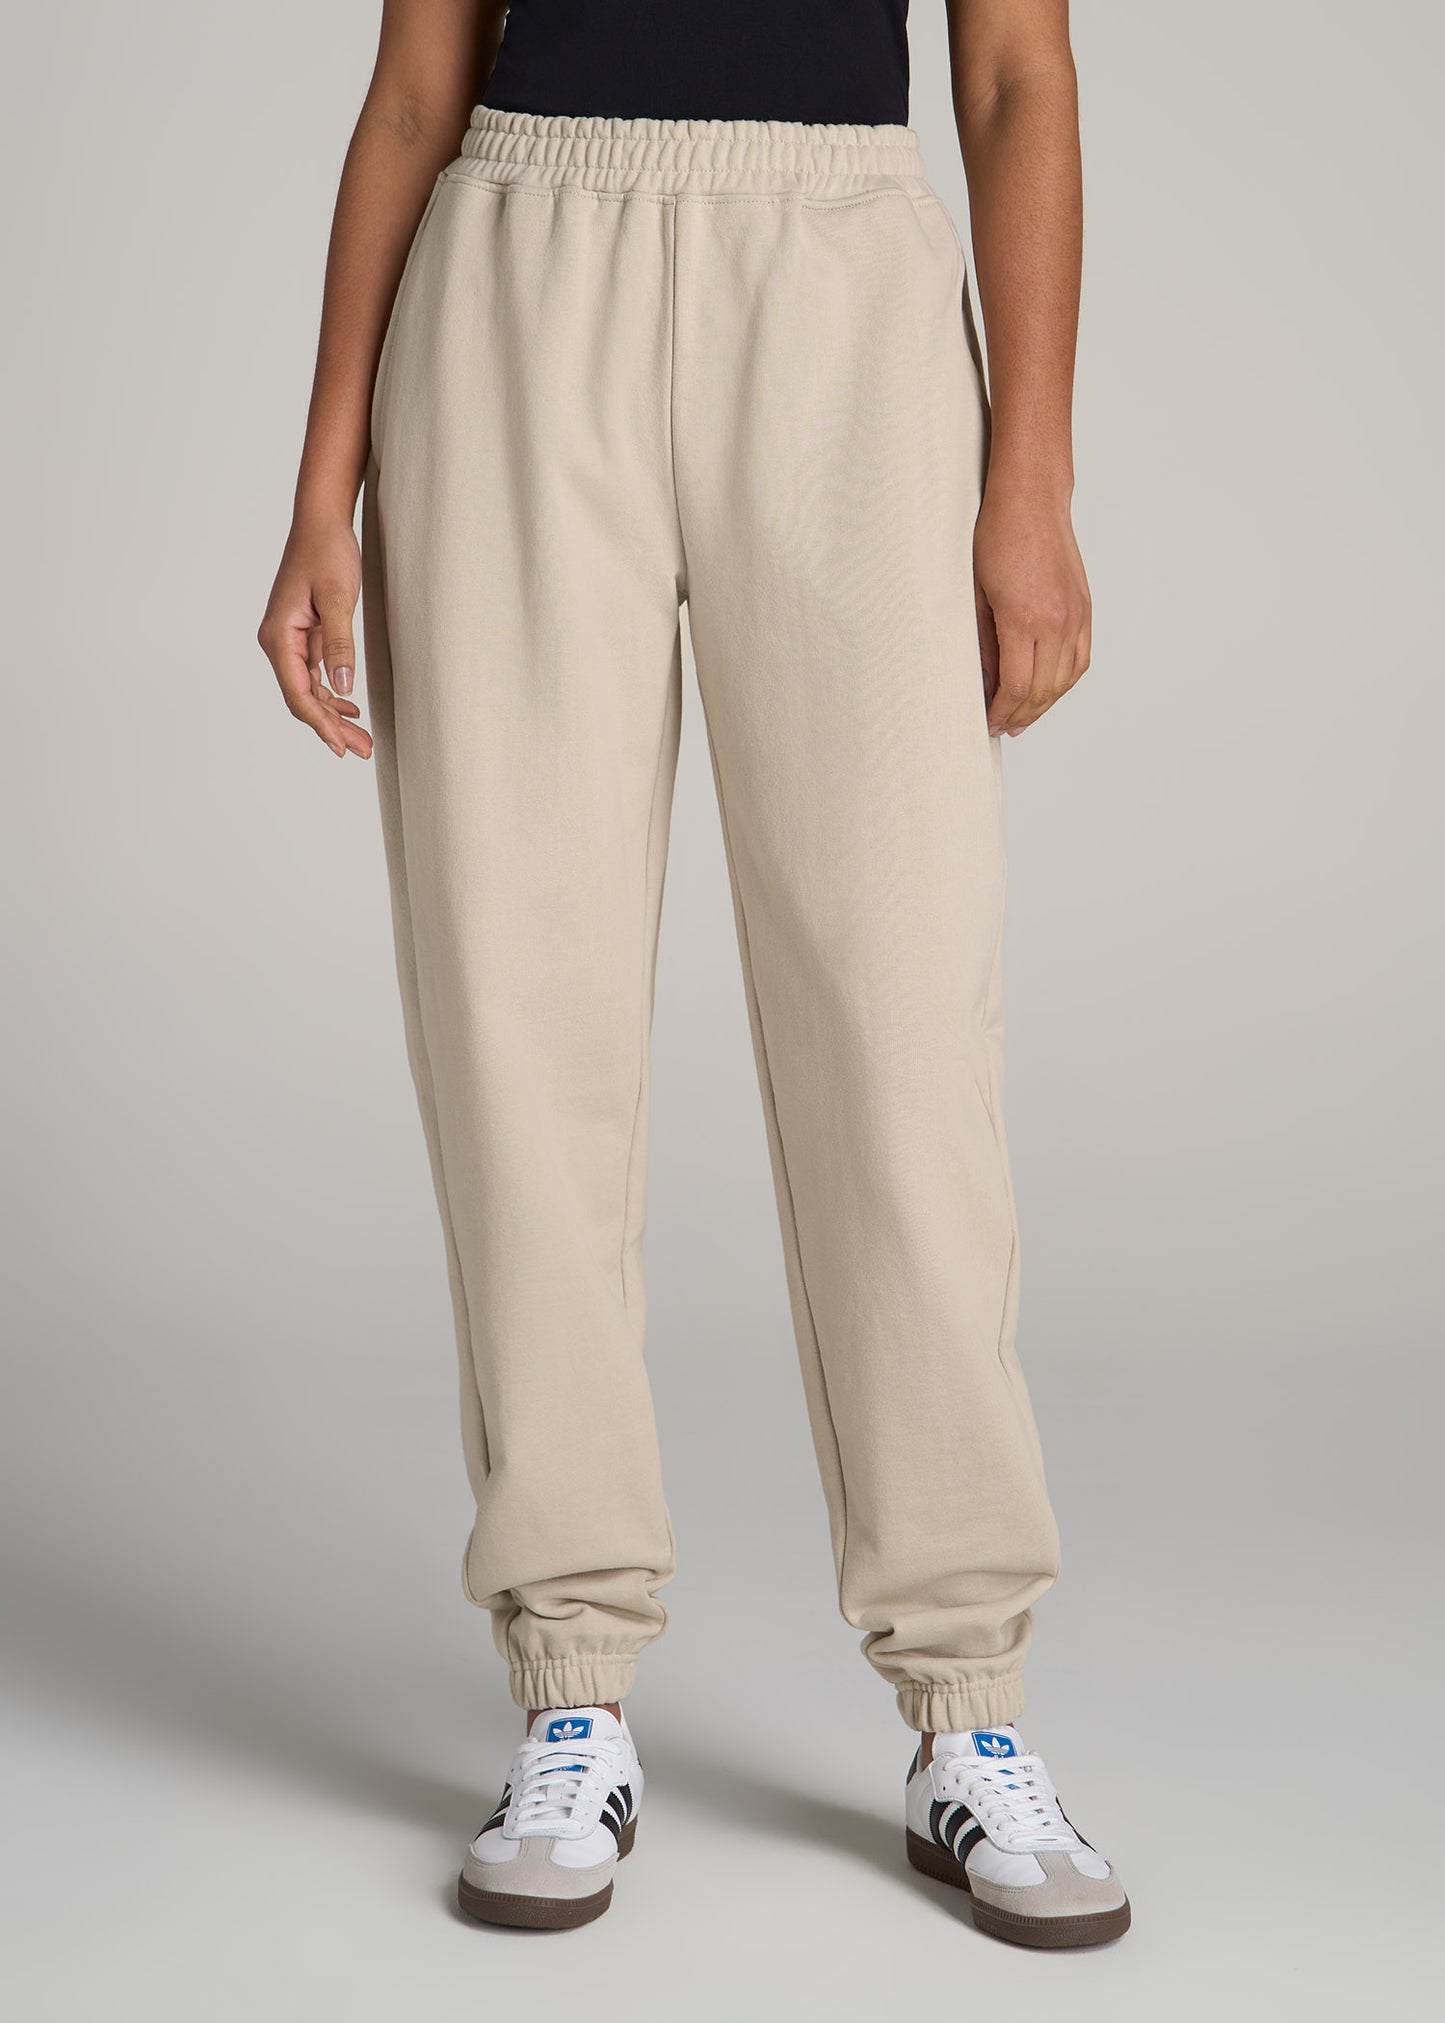 Wearever Oversized French Terry Joggers for Tall Women